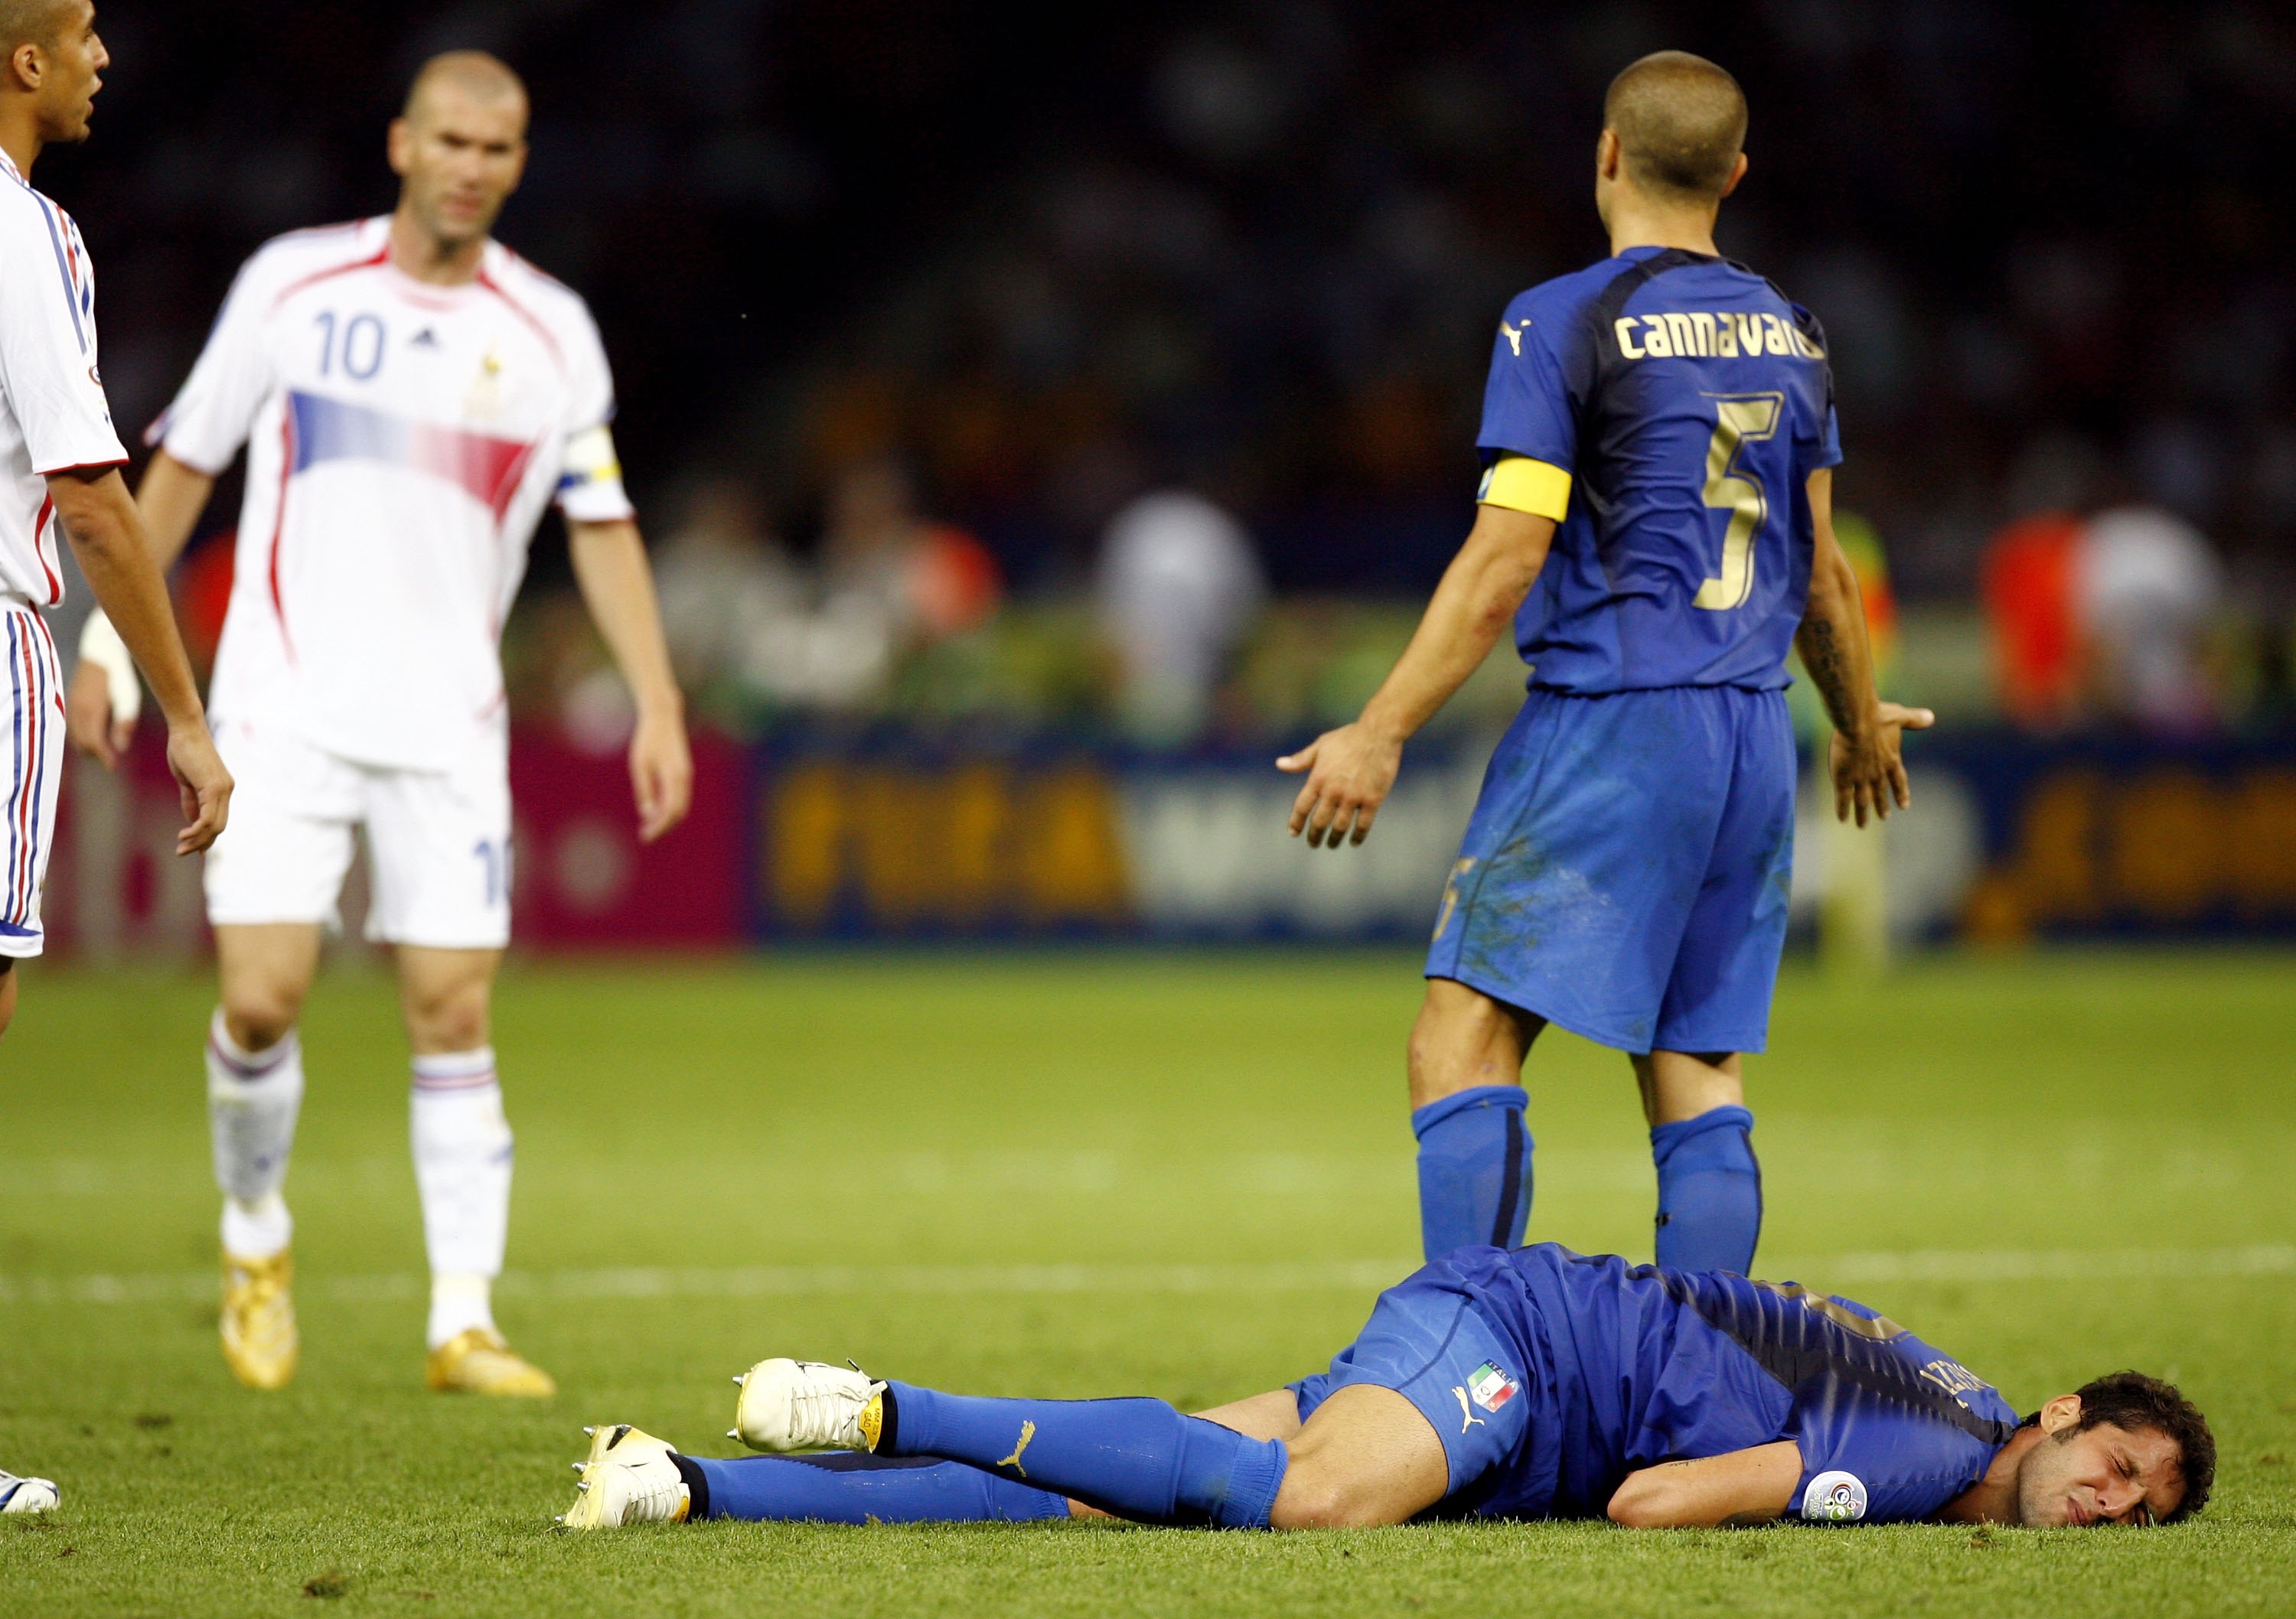 BERLIN - JULY 09:  Fabio Cannavaro (R) of Italy gestures towards Zinedine Zidane #10 (L) of France, whilst Marco Materazzi of Italy lies injured, after being headbutted  in the chest by Zinedine Zidane of France during the FIFA World Cup Germany 2006 Fina